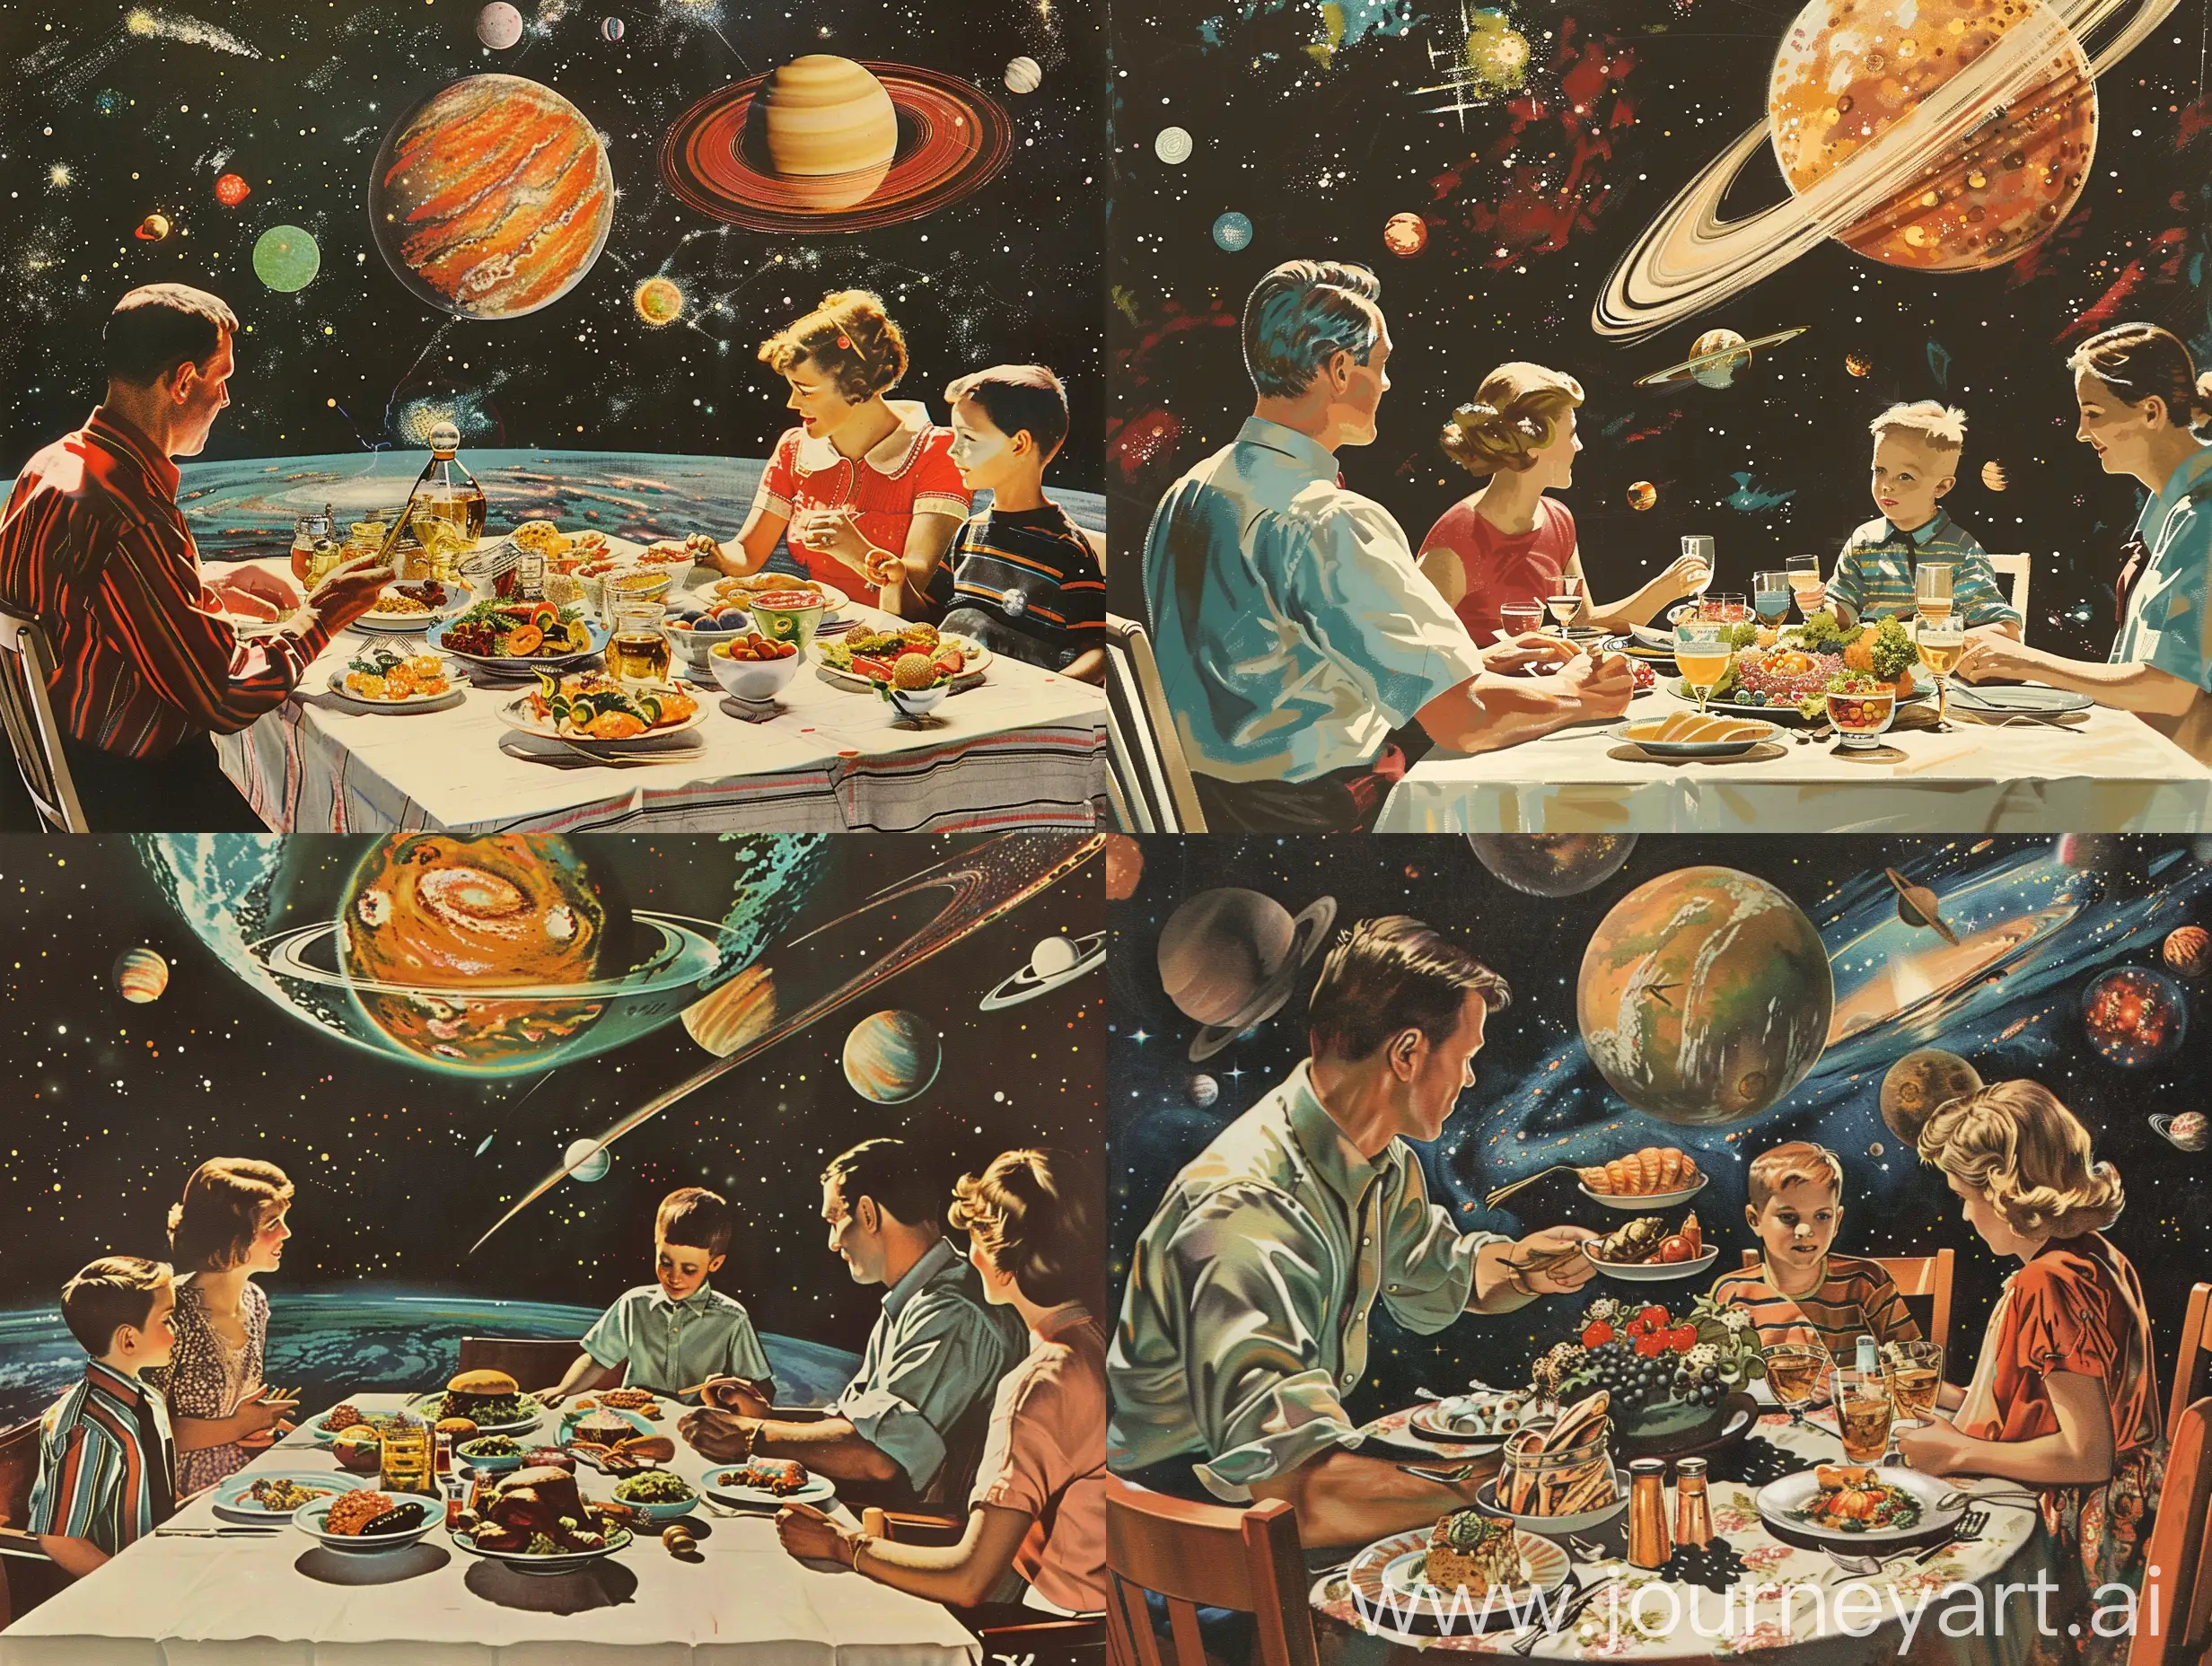 Intergalactic-Family-Feast-Norman-Rockwell-Style-Dinner